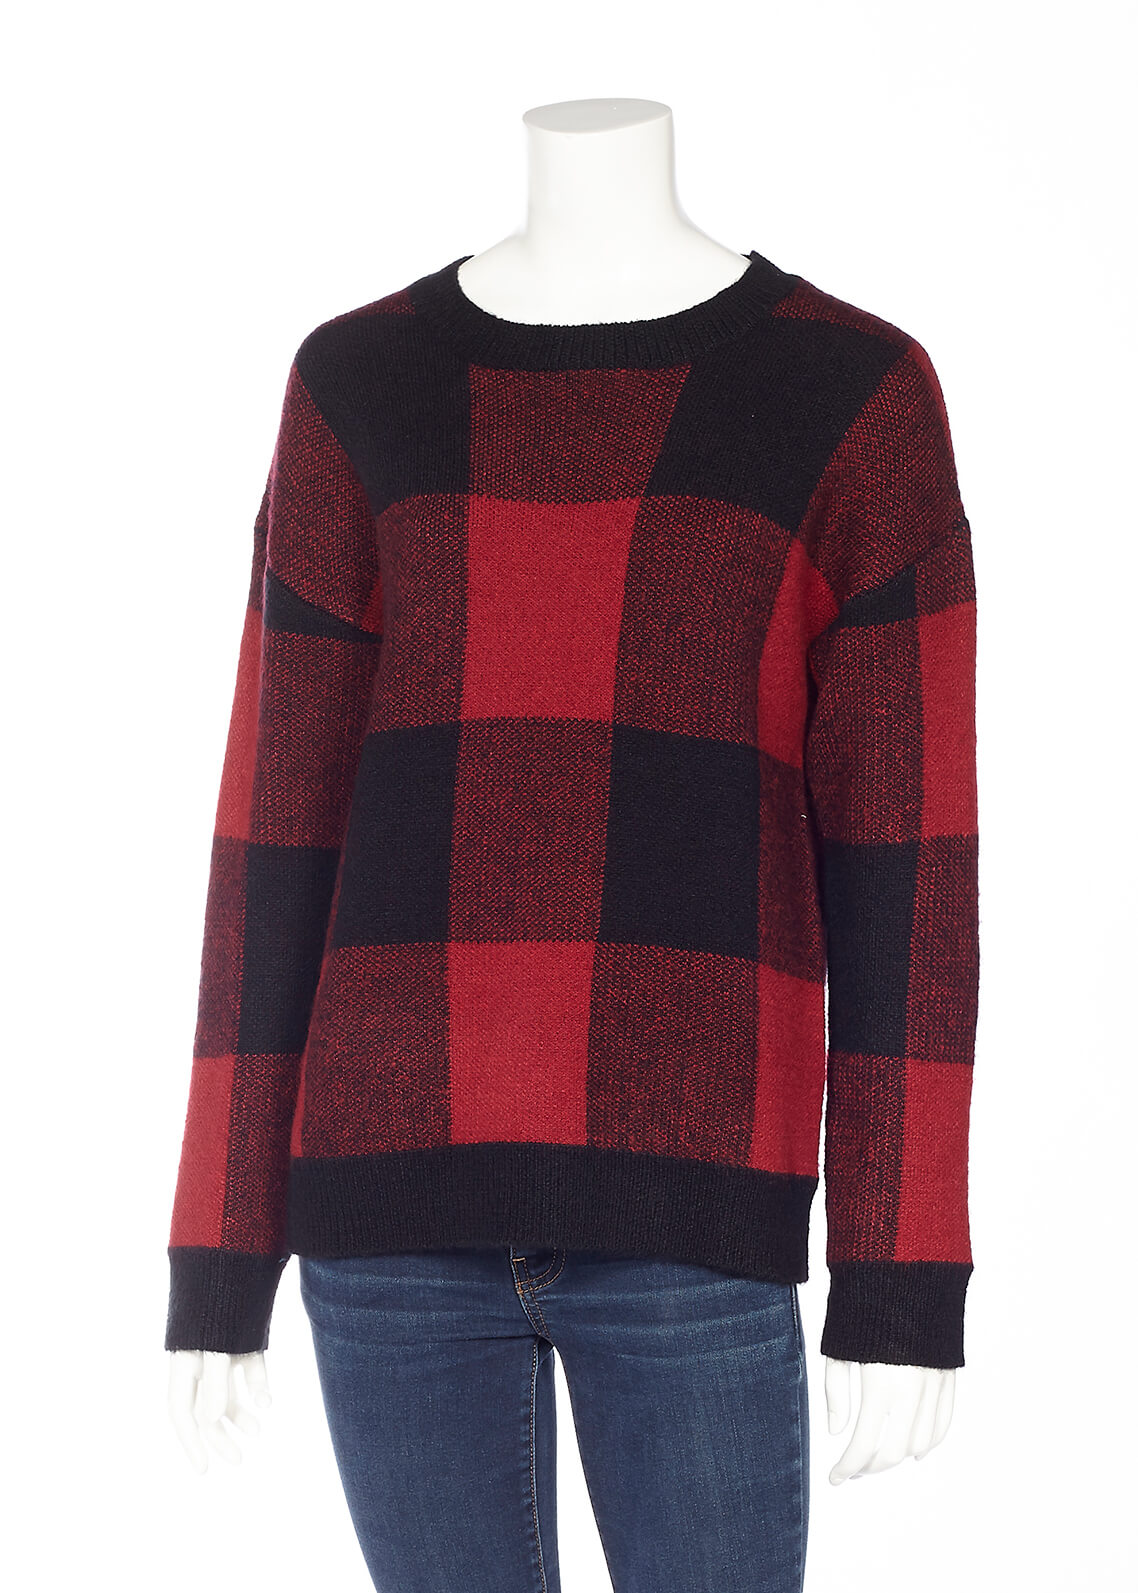 SALE Red Plaid Sweater